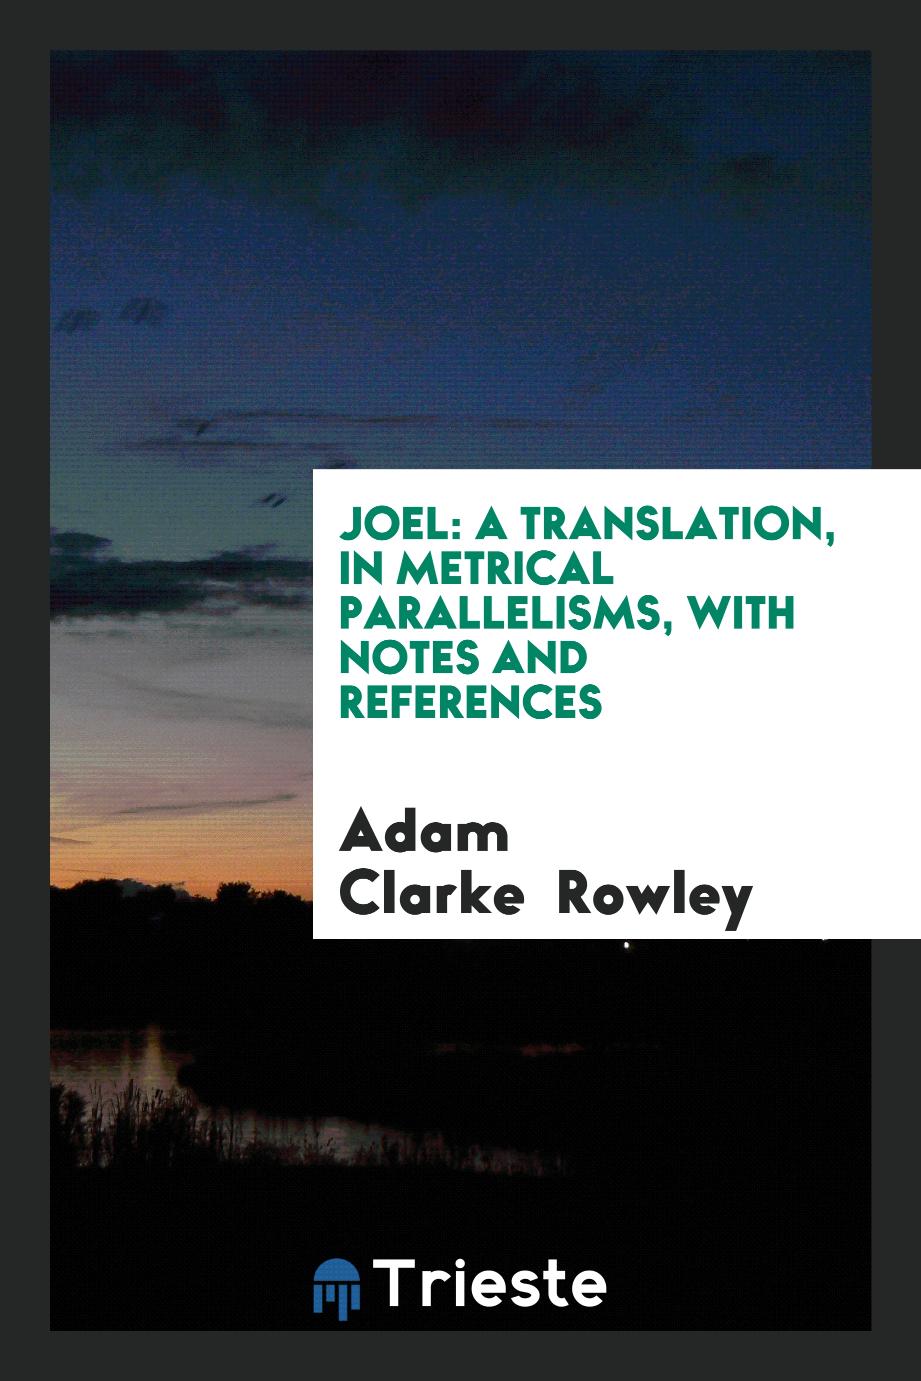 Joel: a translation, in metrical parallelisms, with notes and references